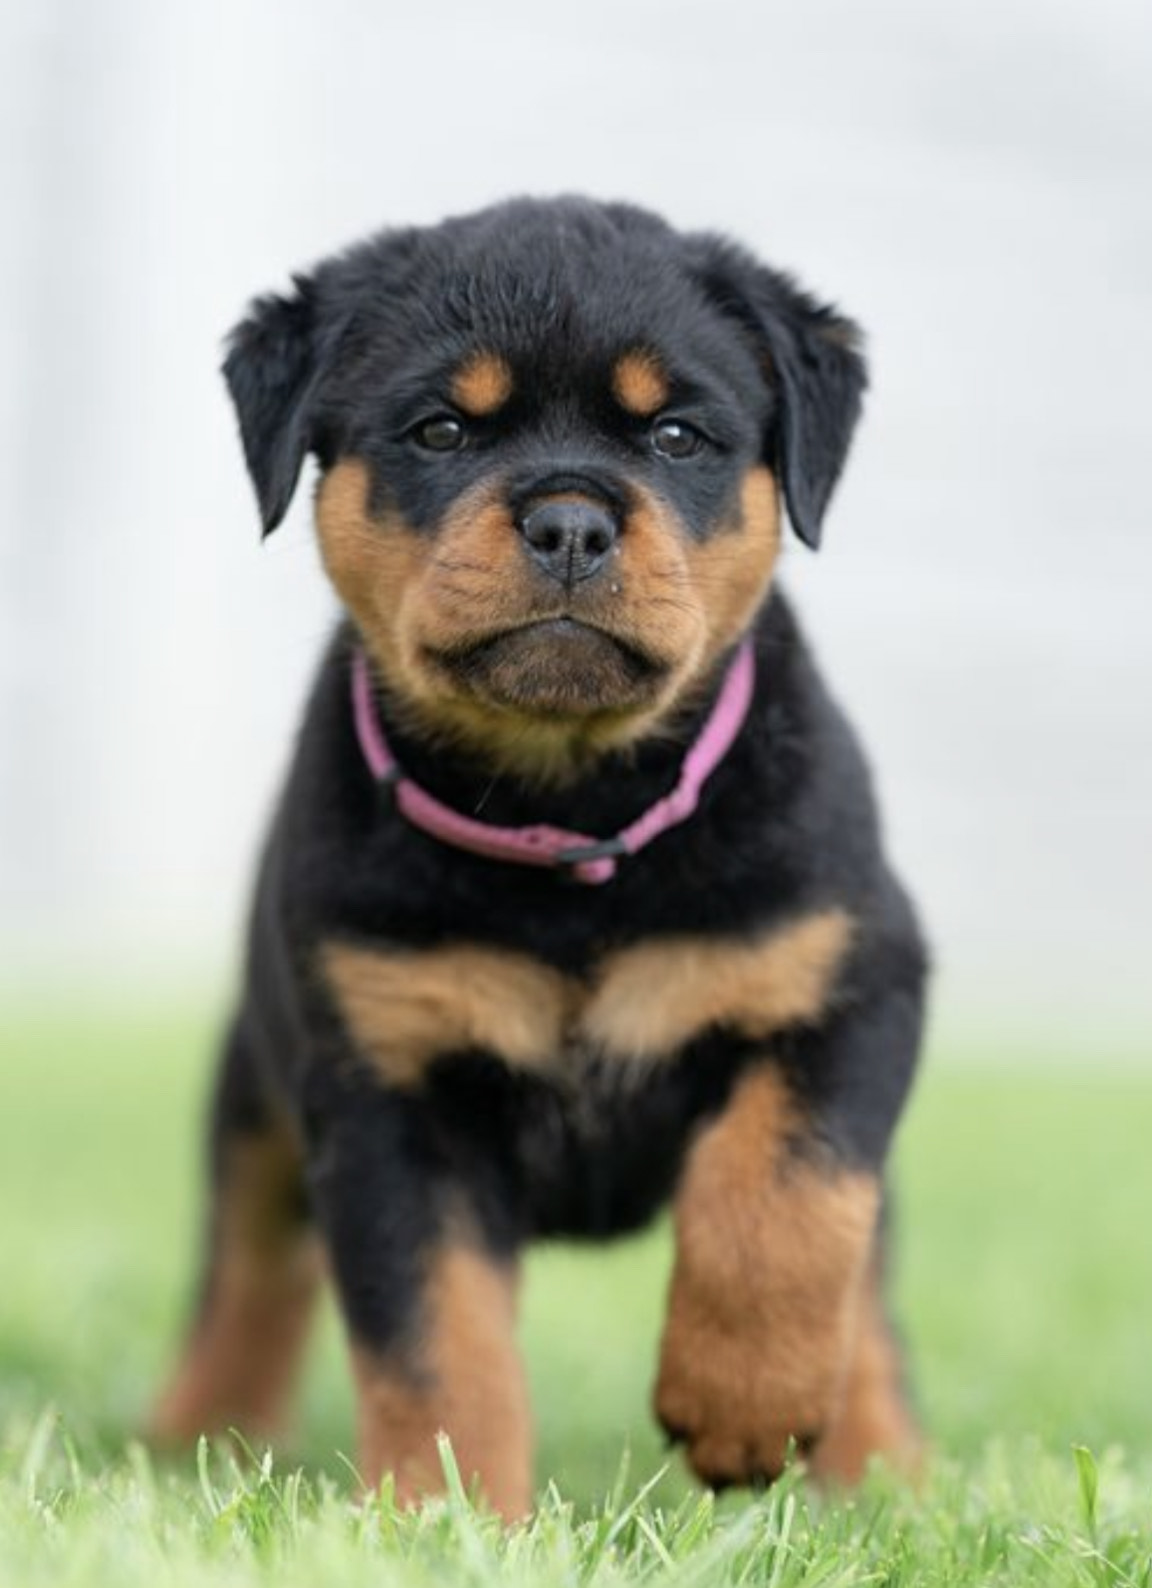 puppy rottweiler for sale